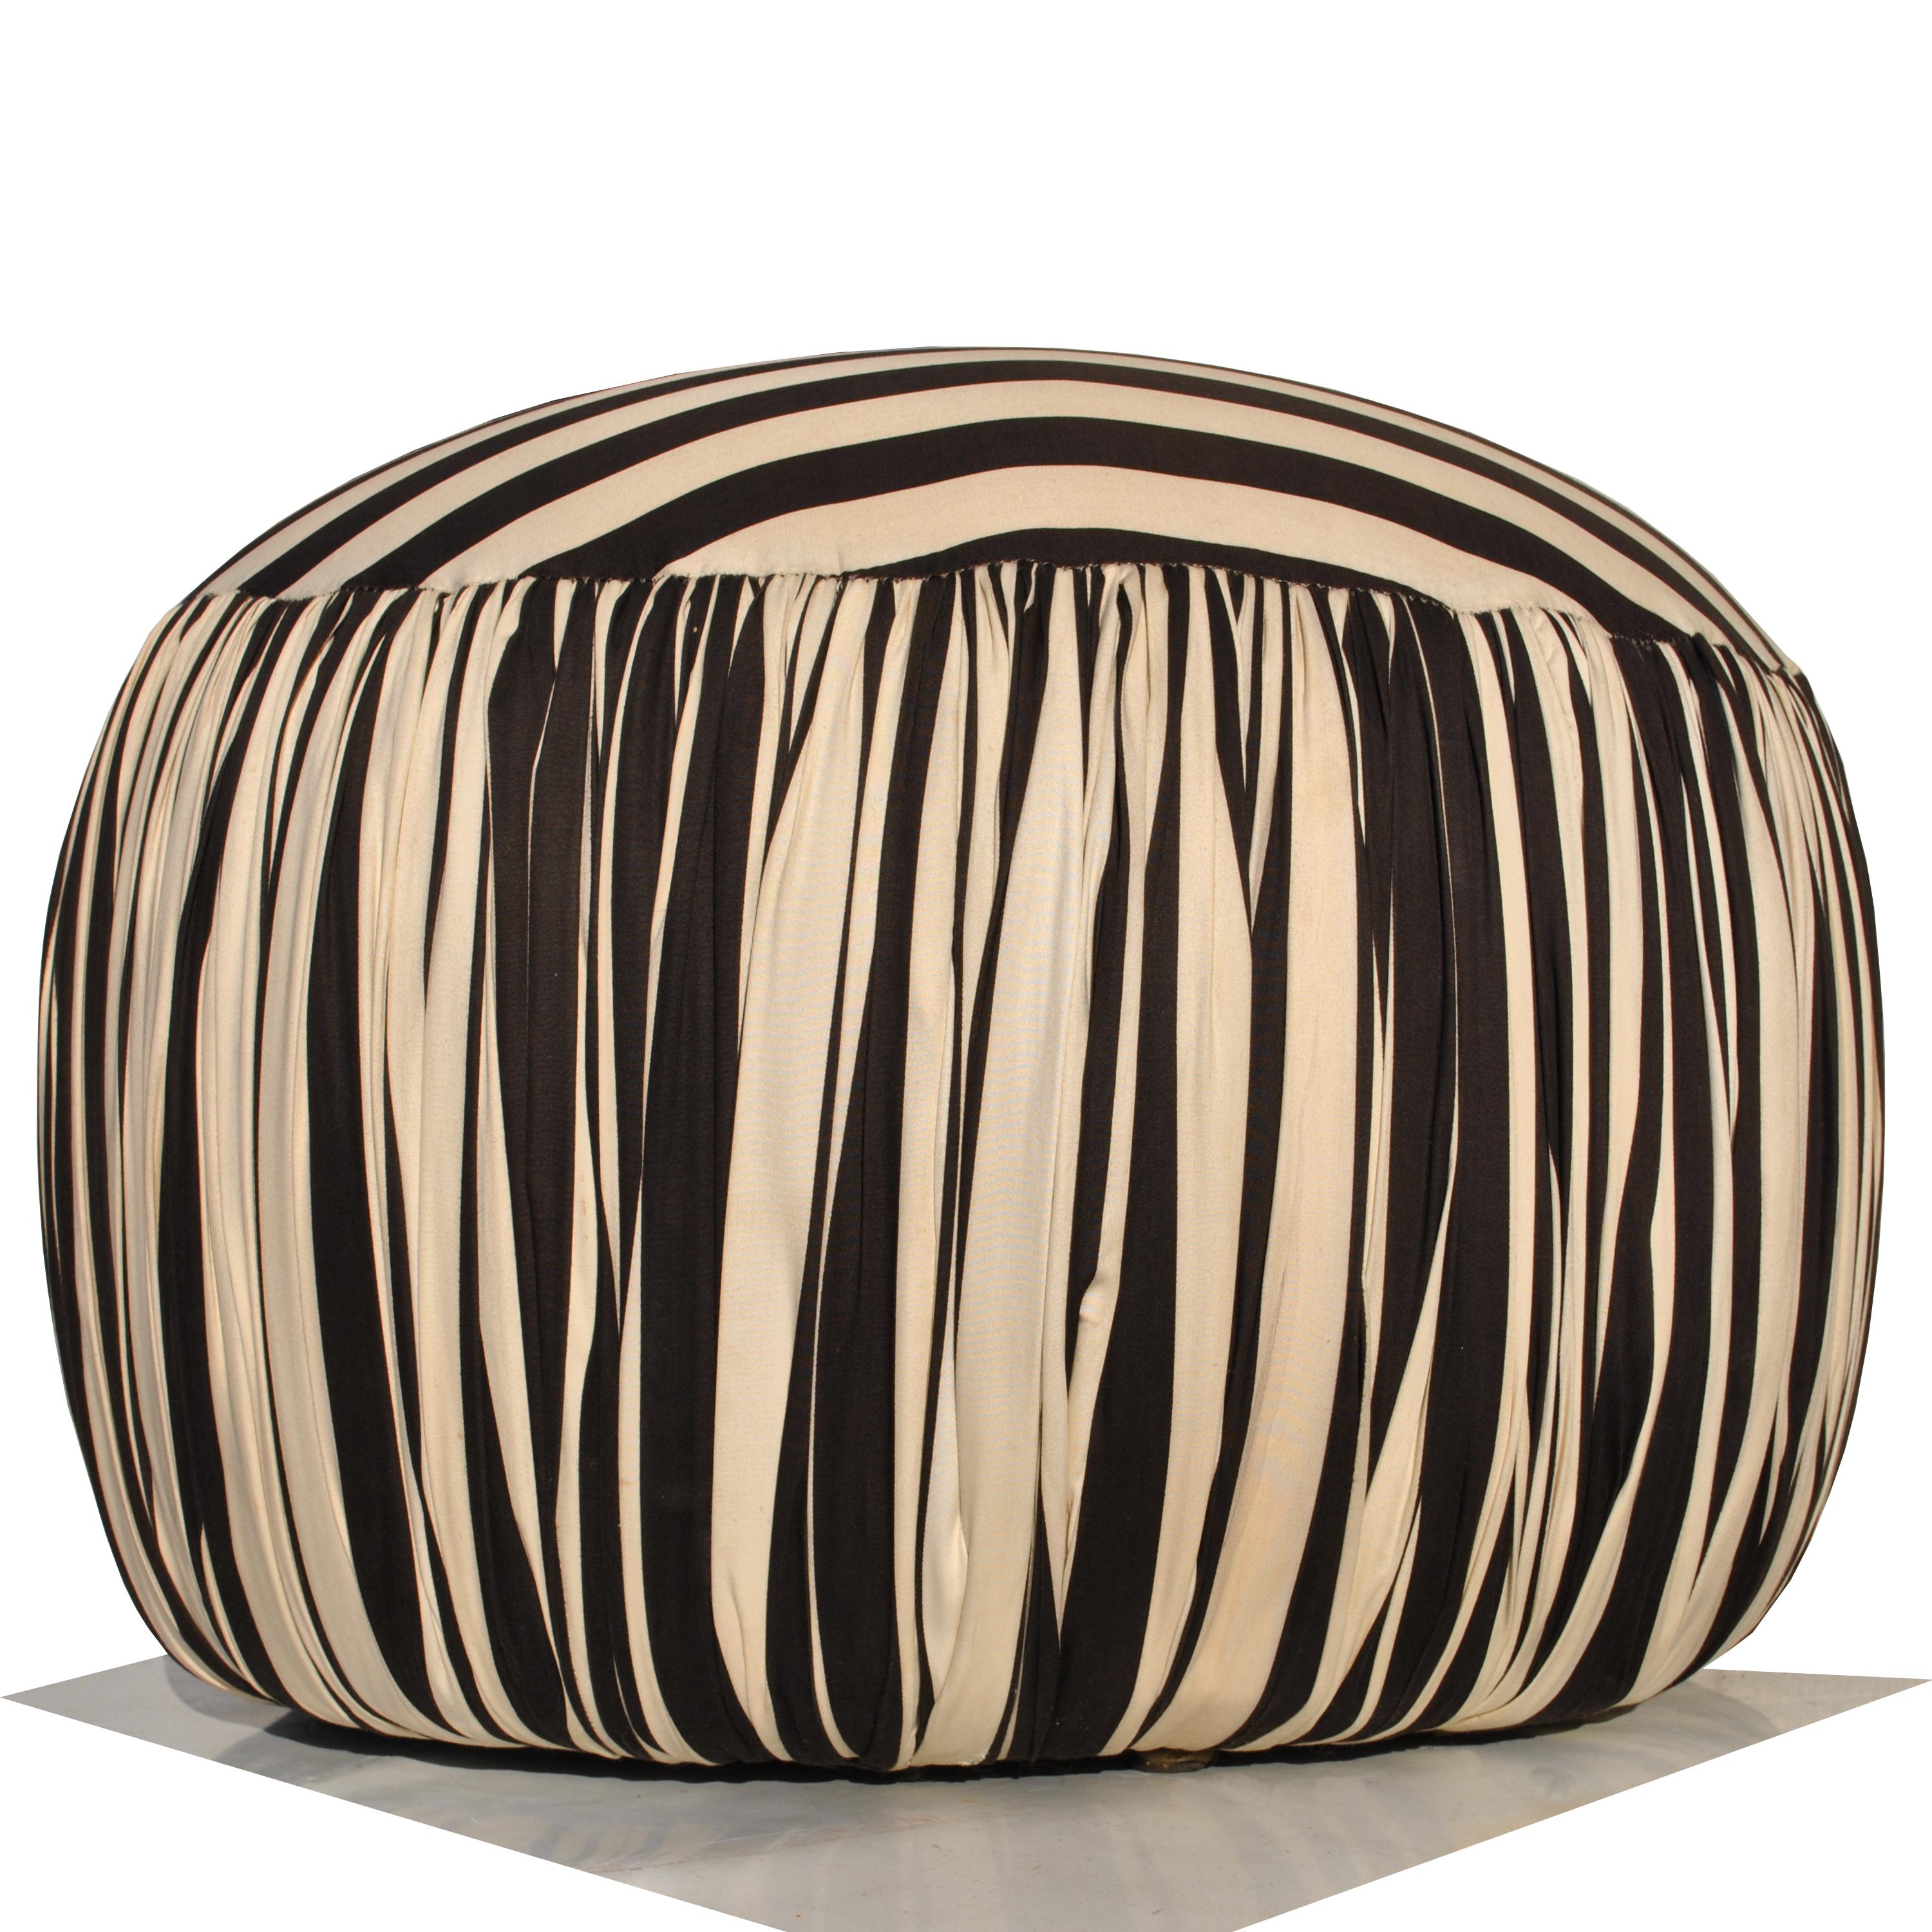 Fabric Contemporary Round Black And White Pouf Ottoman For Sale